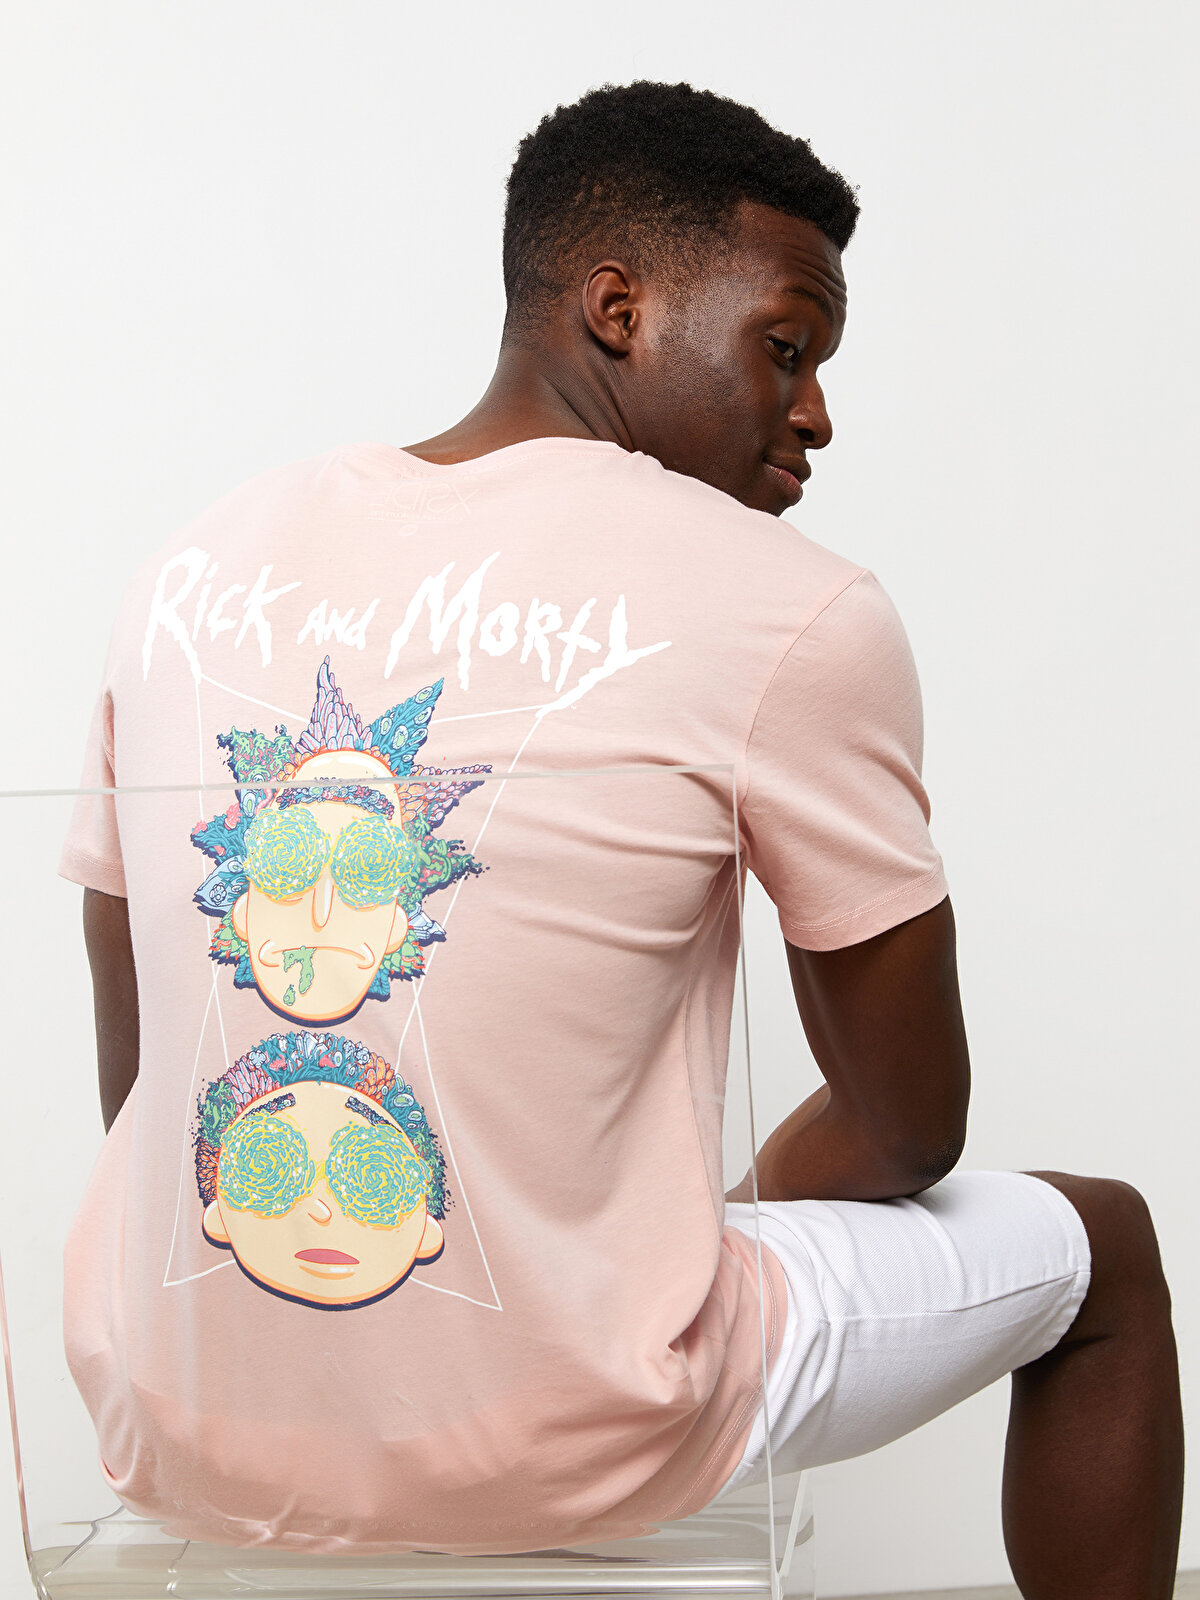 XSIDE Crew Neck Rick and Morty Printed Combed Cotton Men's T-Shirt  -S2GC97Z8-FXB - S2GC97Z8-FXB - LC Waikiki